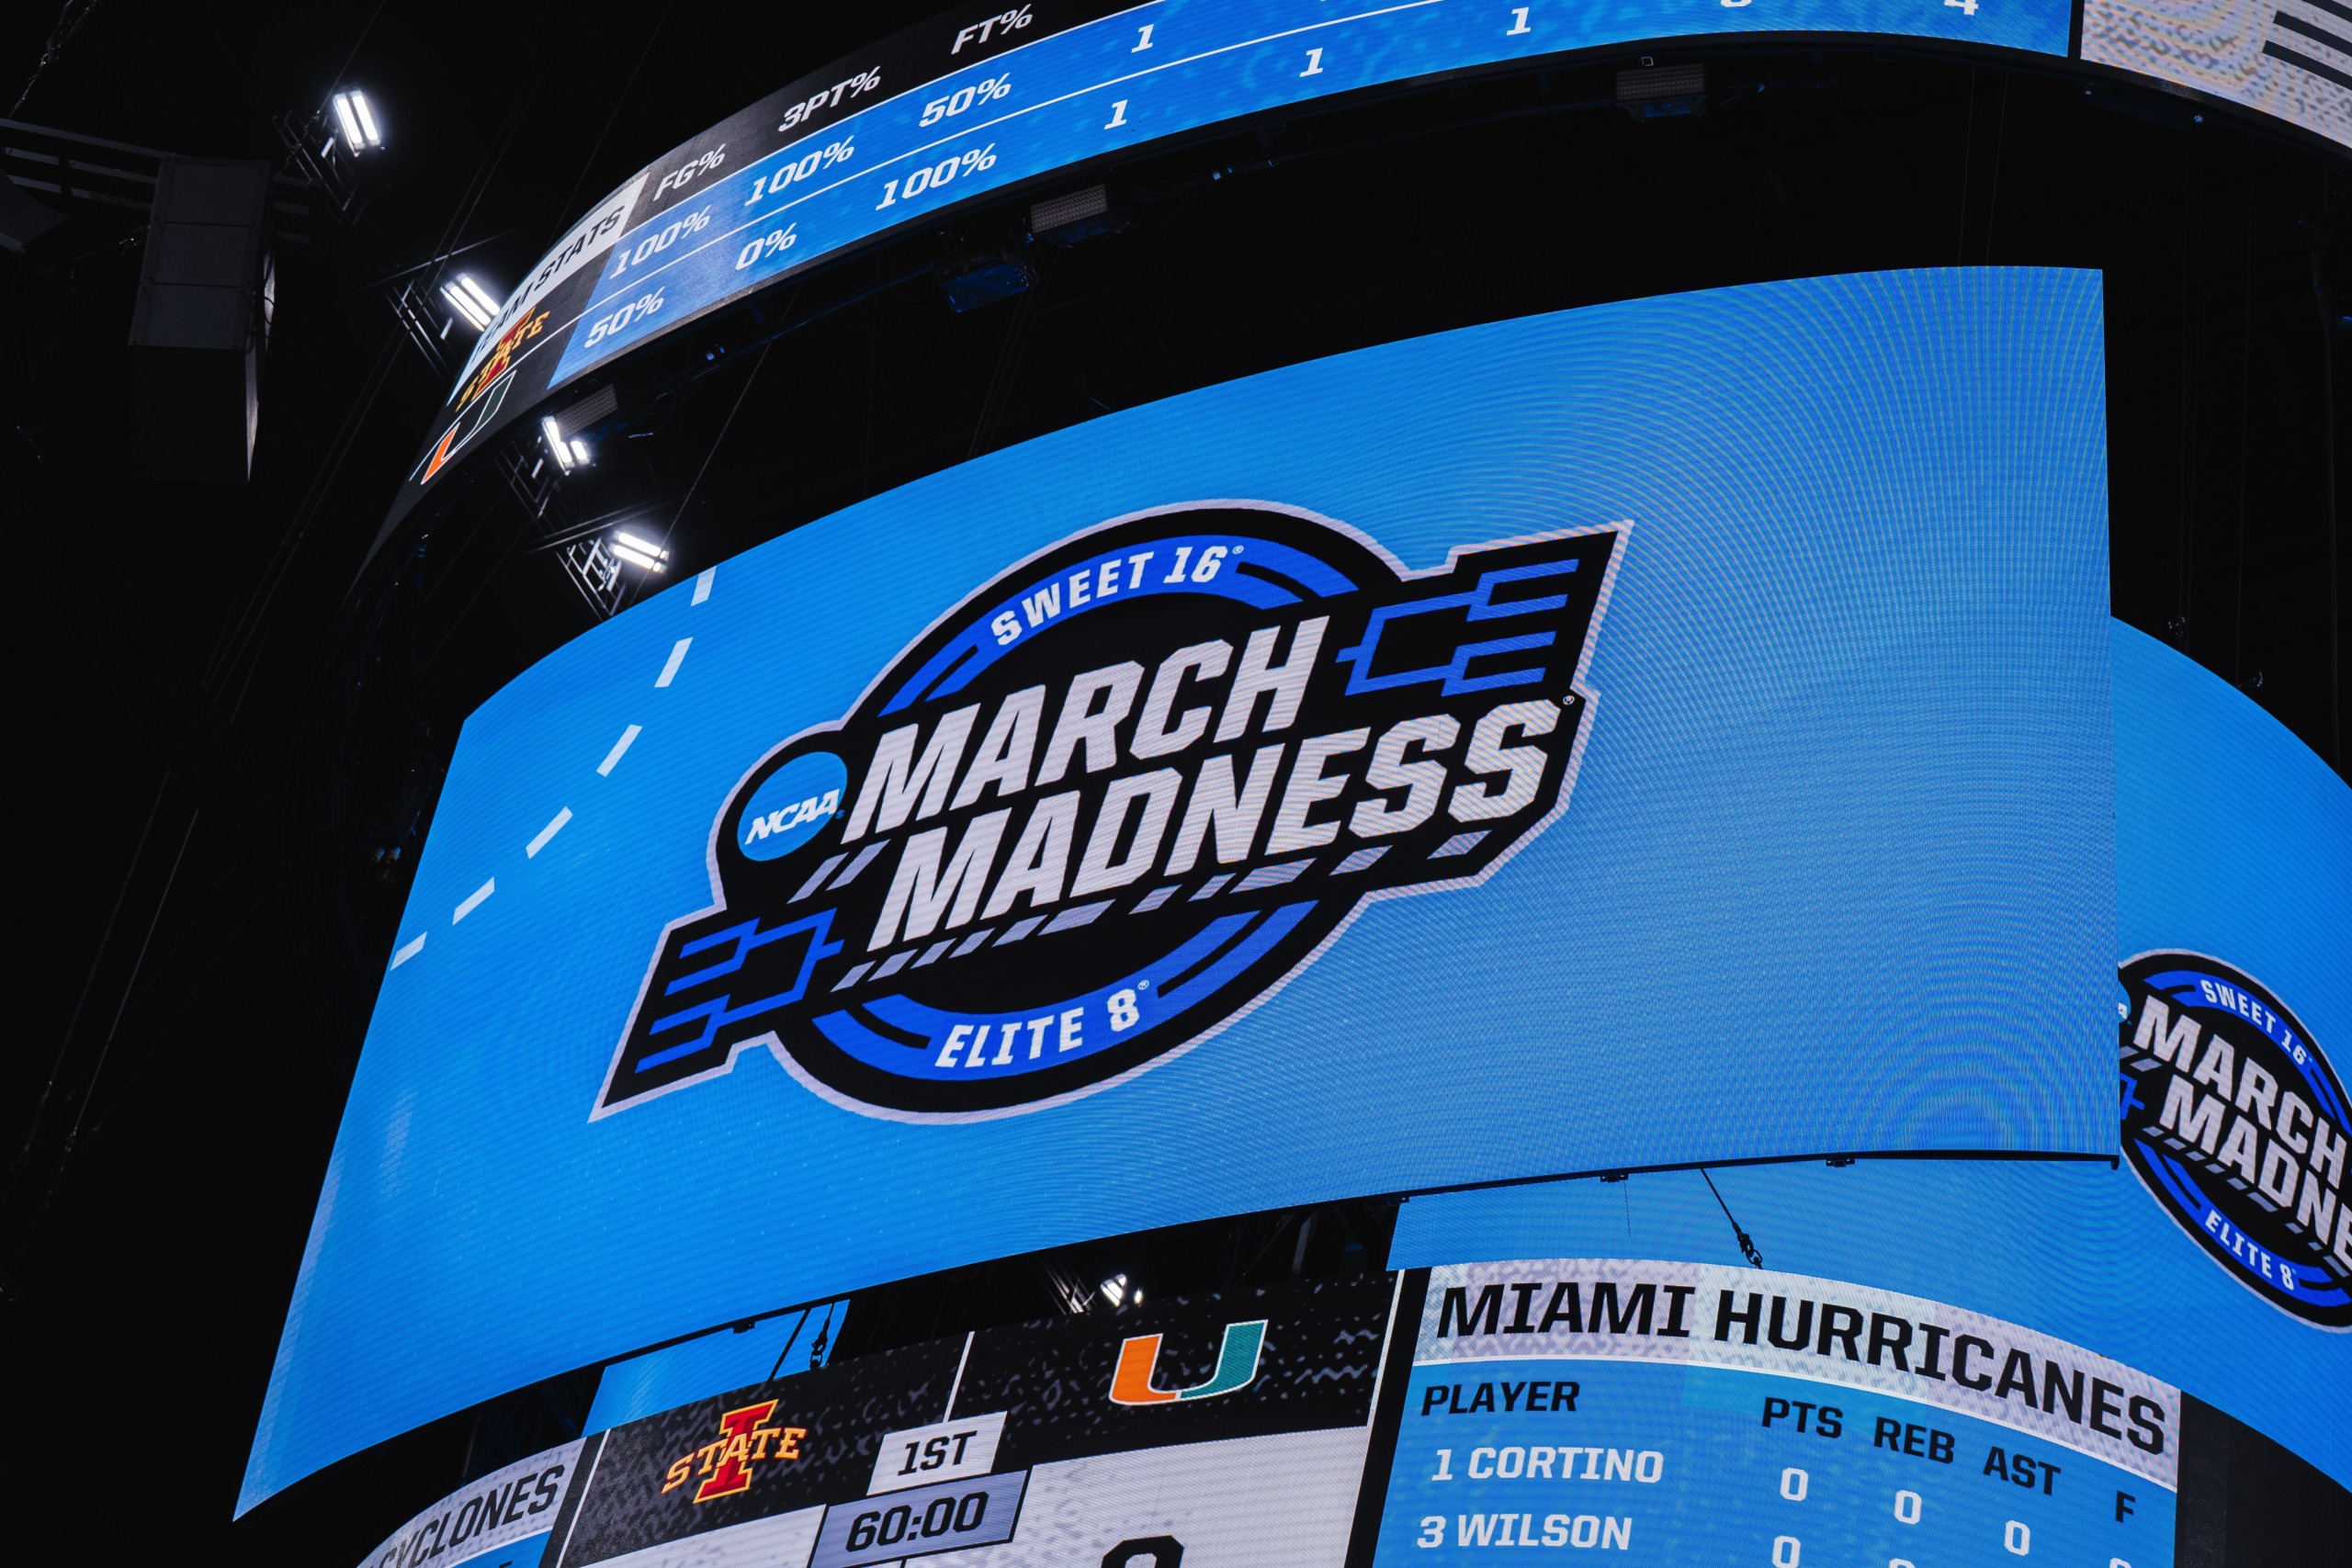 College Basketball’s “One Shining Moment” is Taking the Court in March